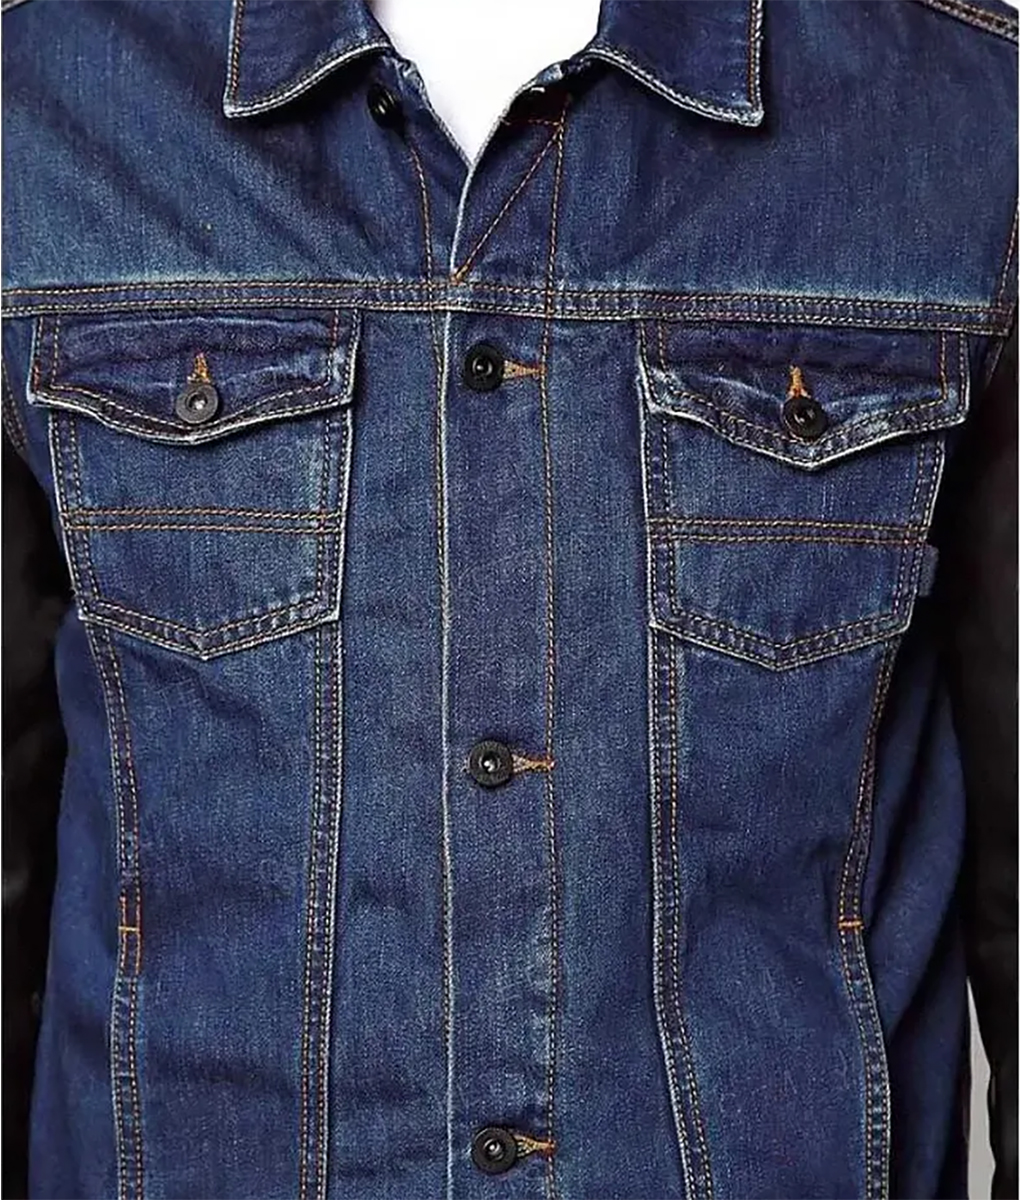 Men’s Denim Jacket with Leather Sleeves